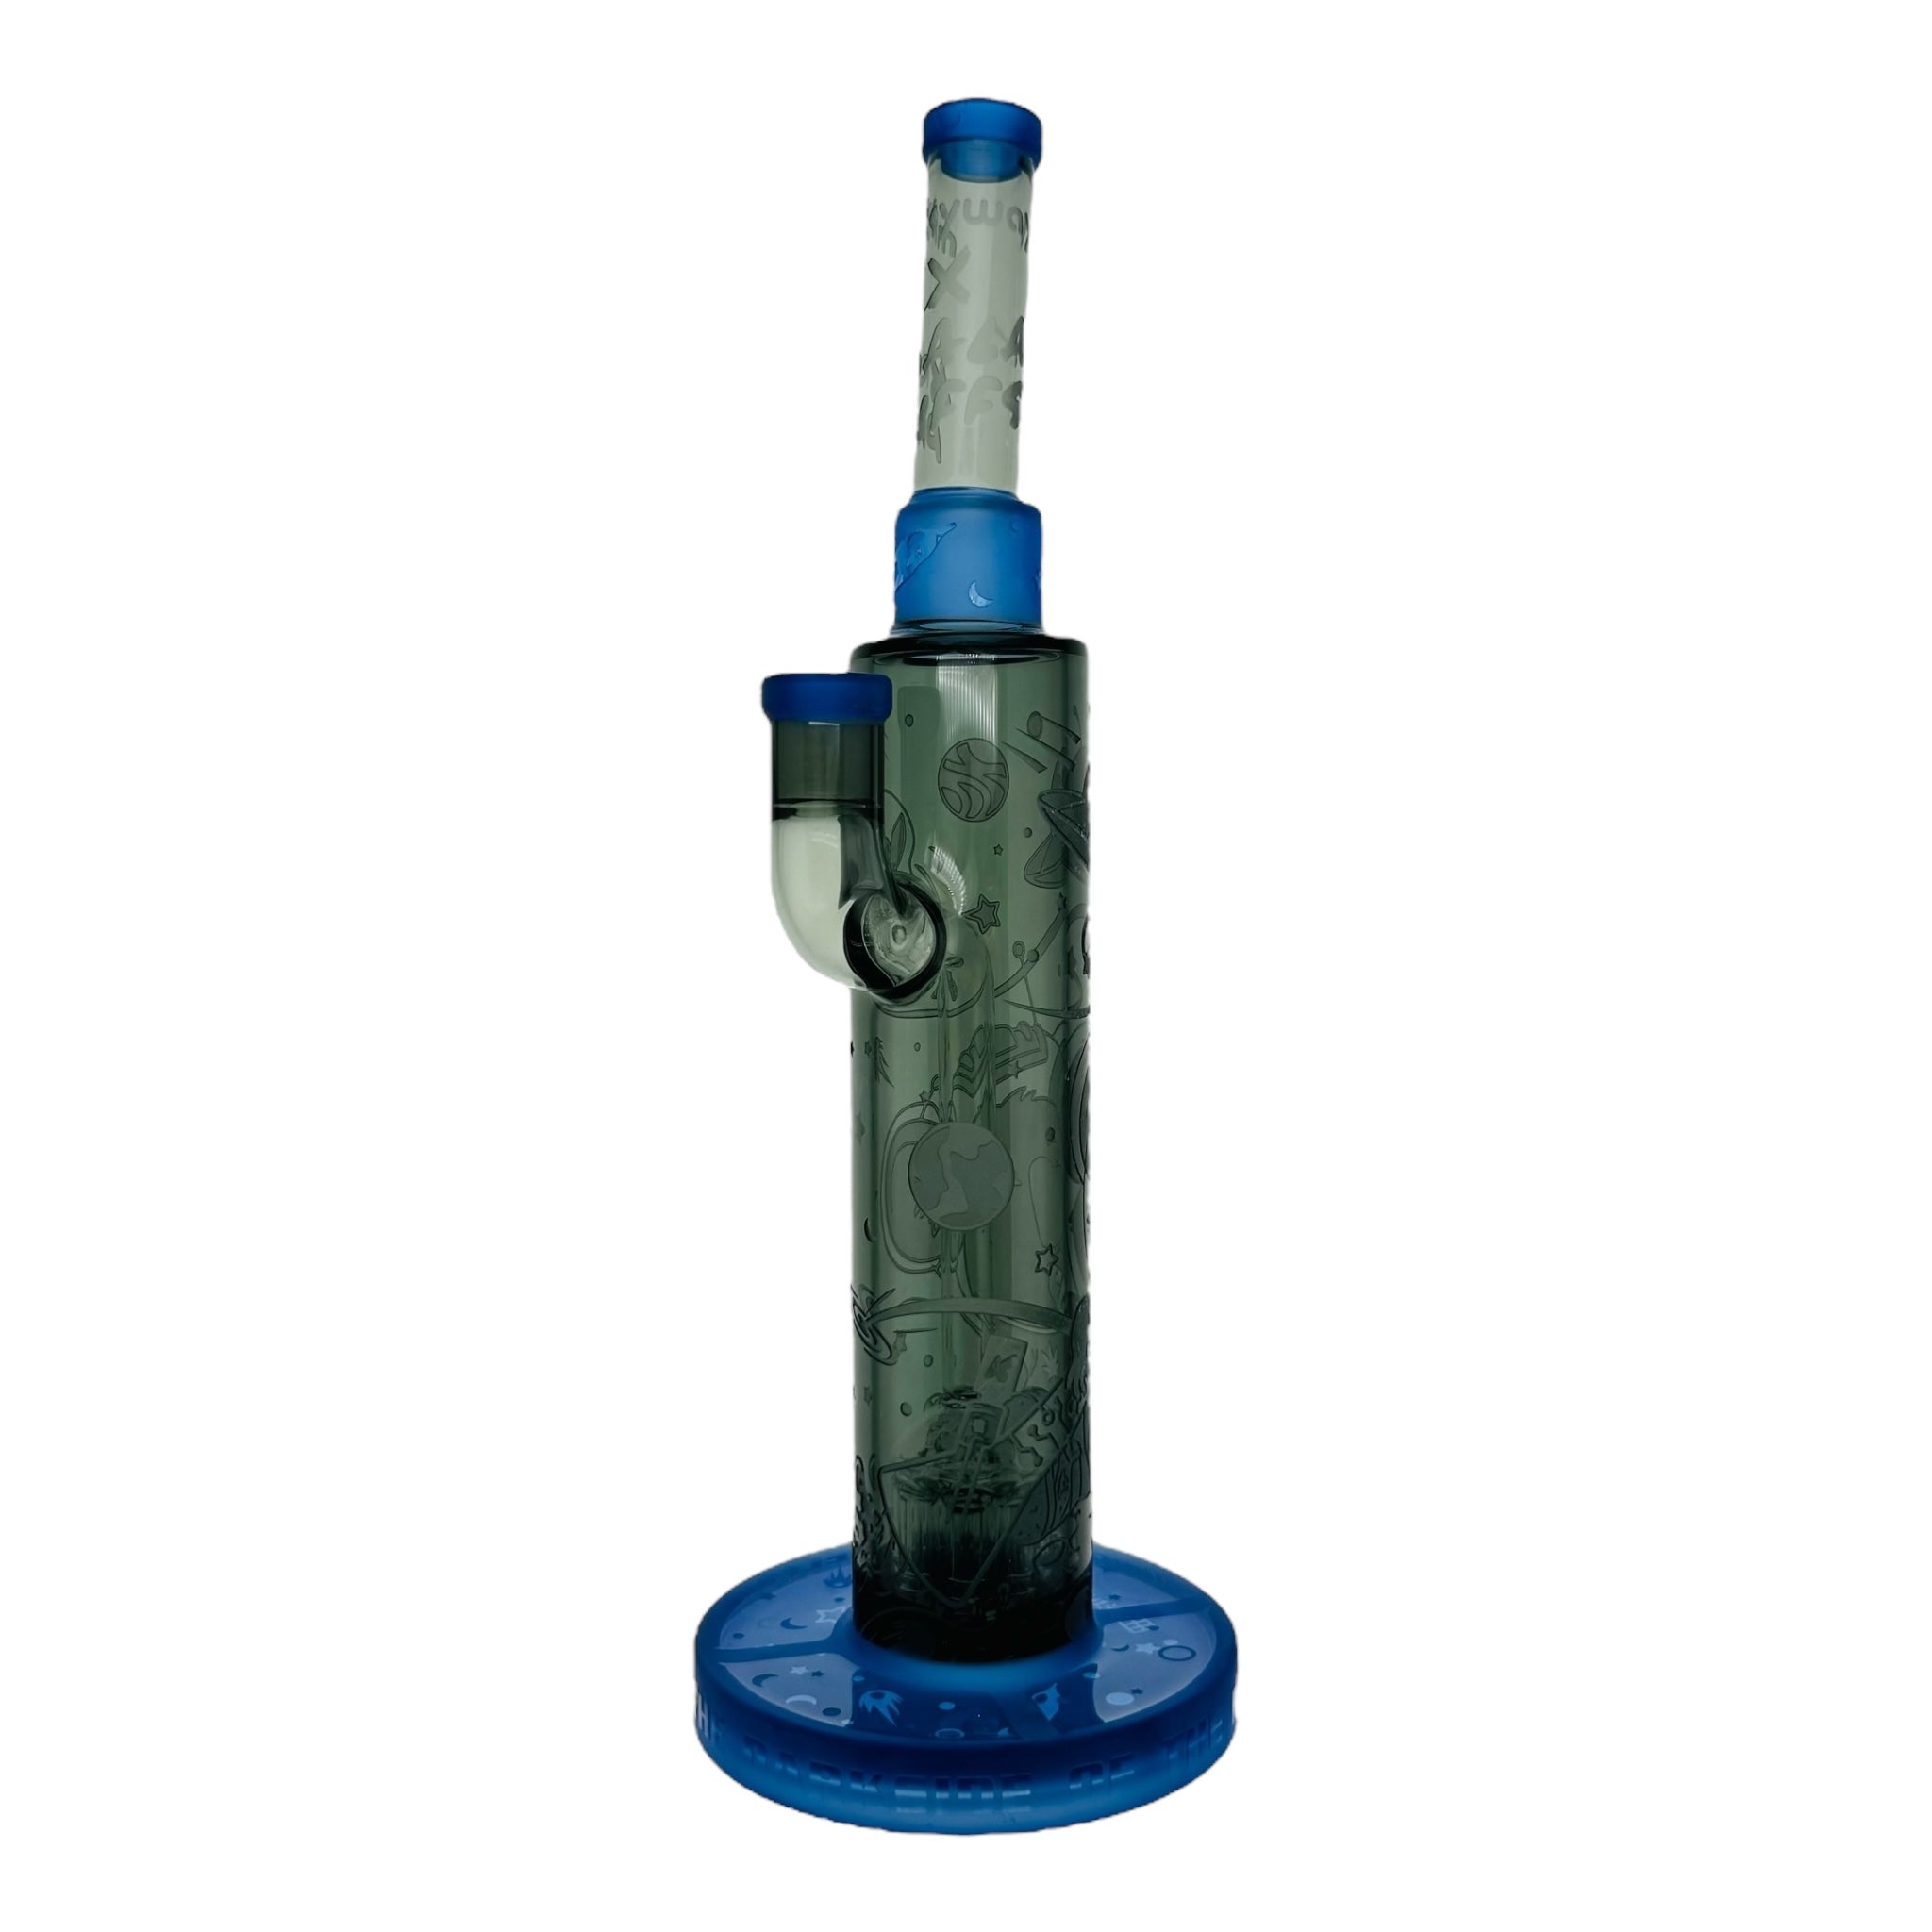 Milkyway Glass and Koala Puffs Moon Sesh 12” Dab Rig Or Bong for cannabis Black And Blue